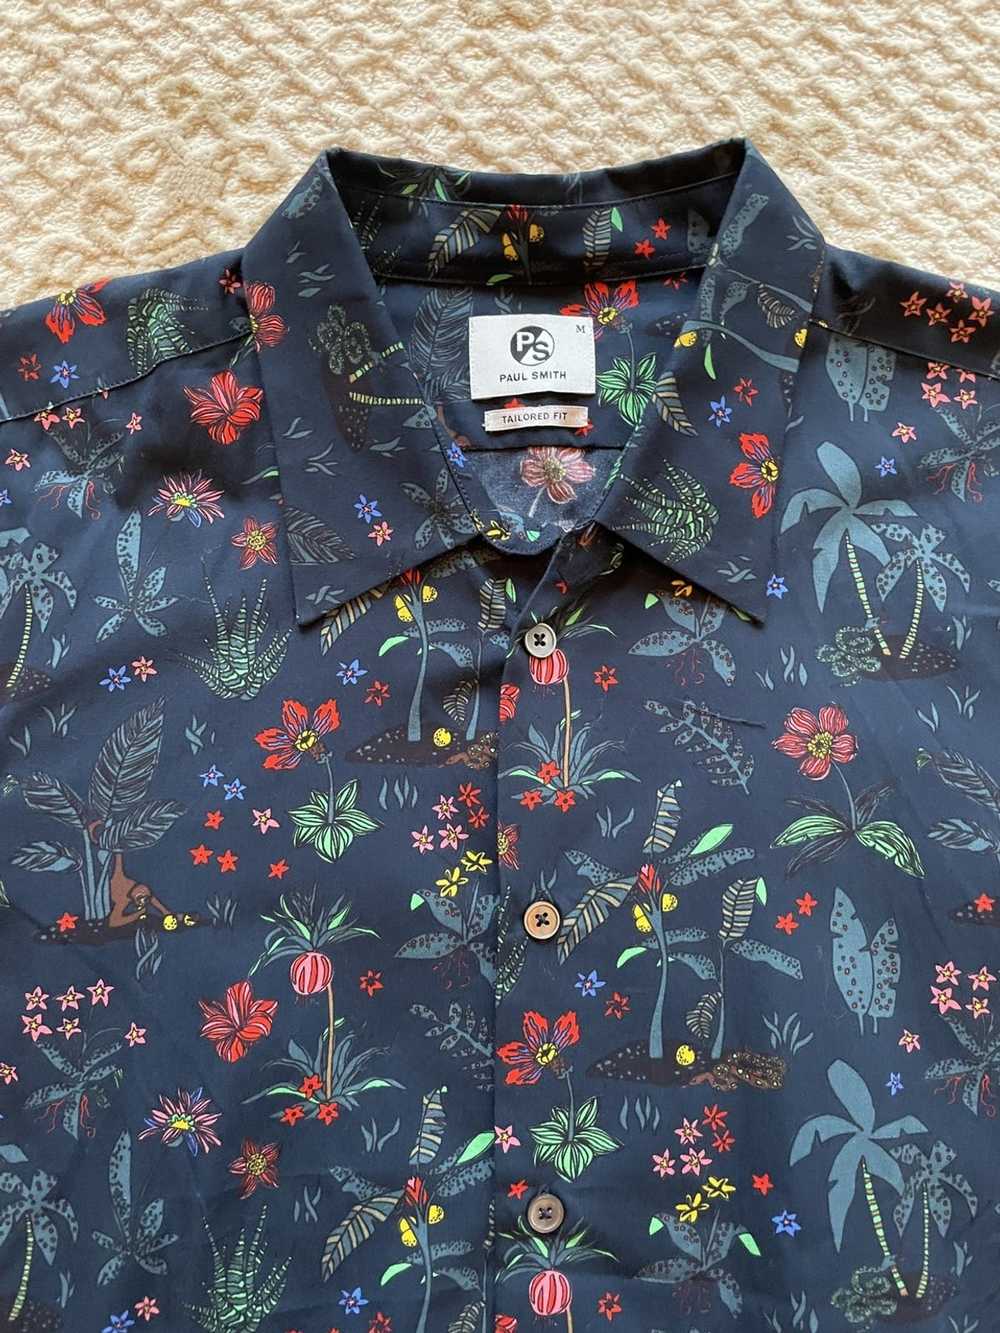 Paul Smith Navy Floral Shirt - image 3